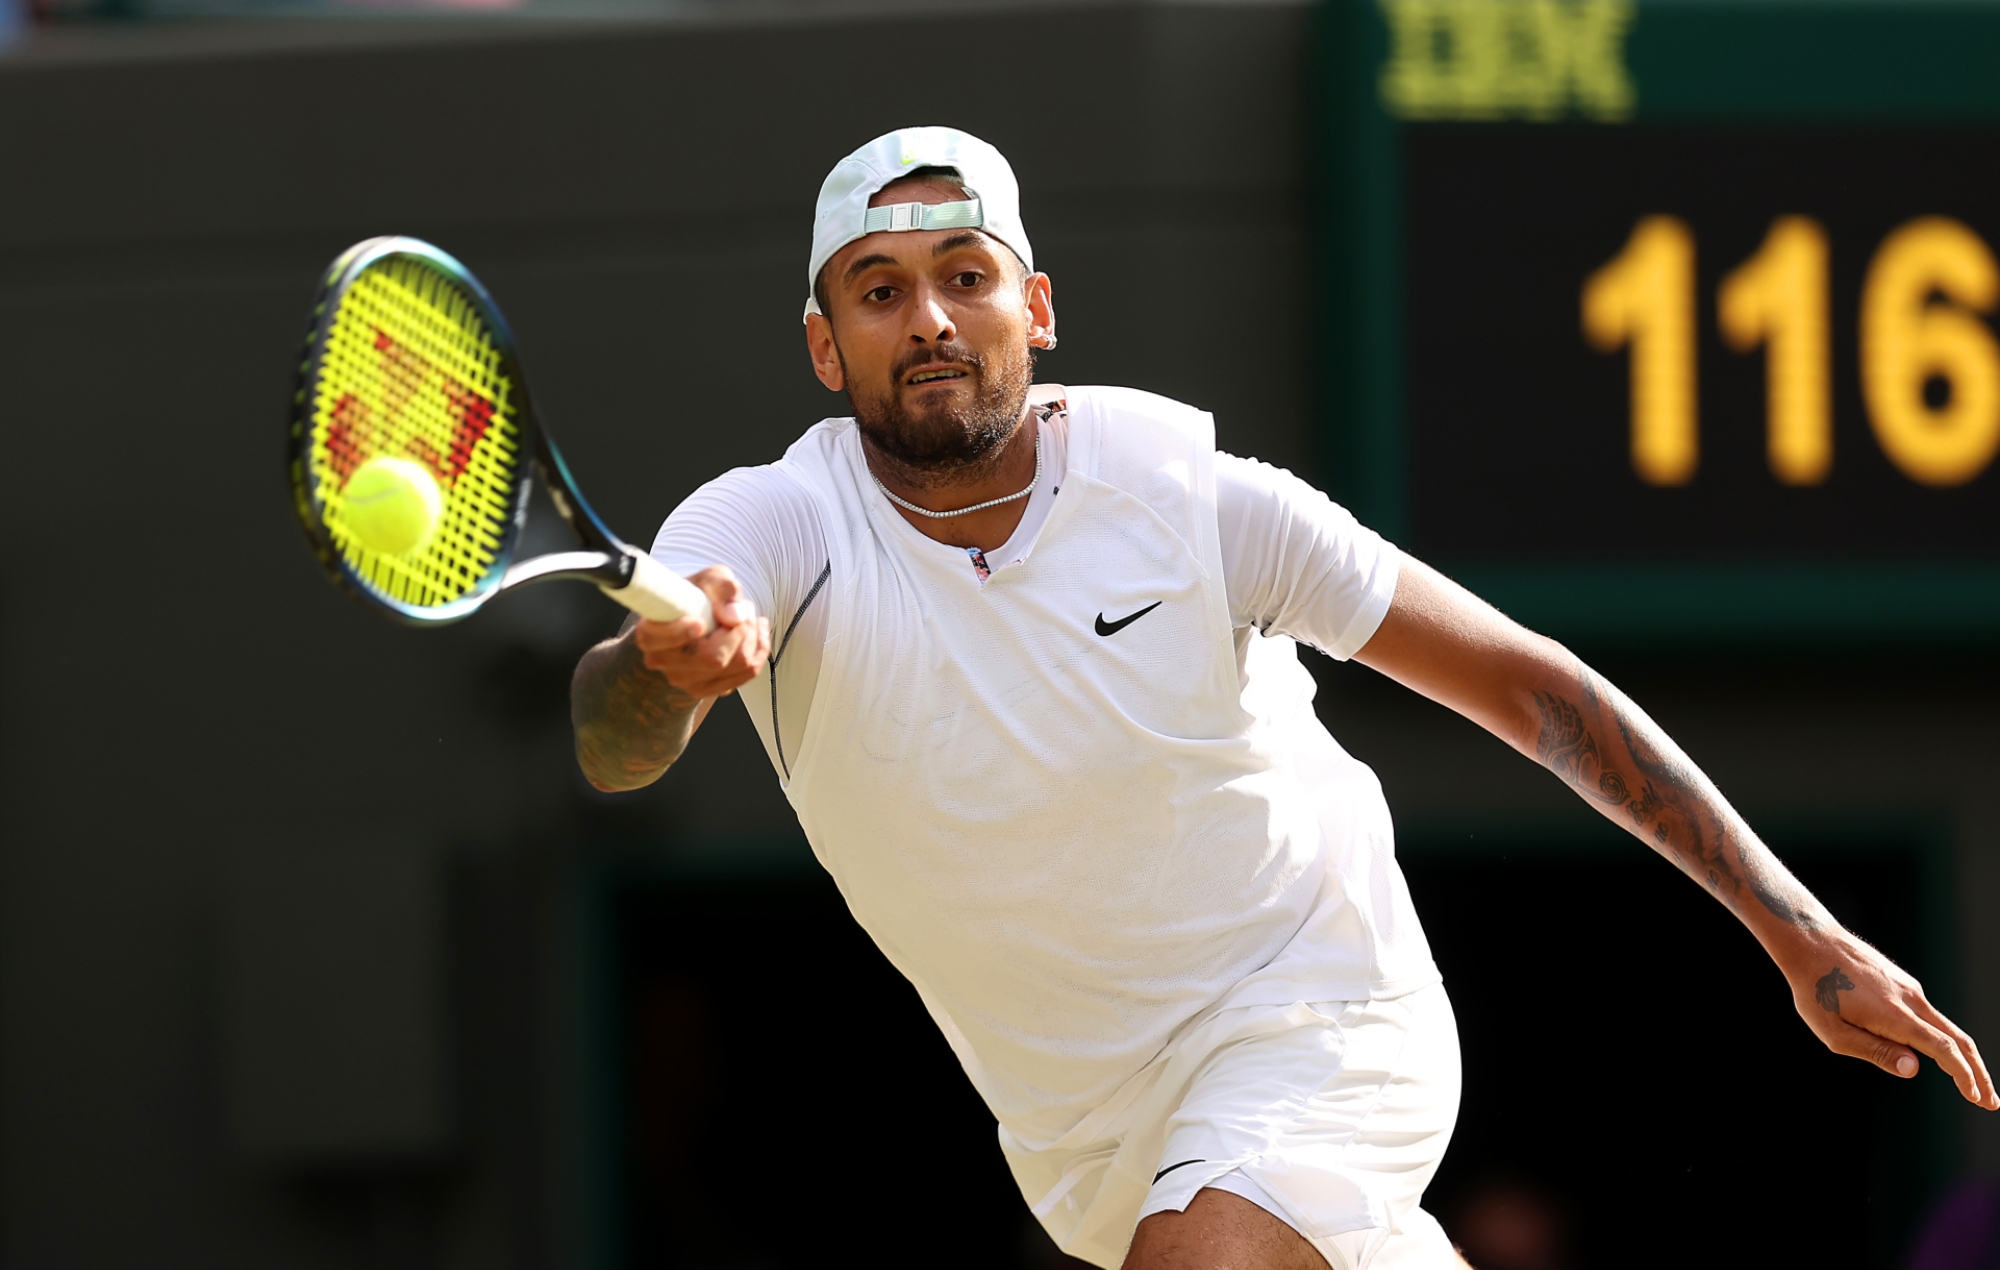 Tennis Star Nick Kyrgios Complained About US Open Crowd Smoking Weed